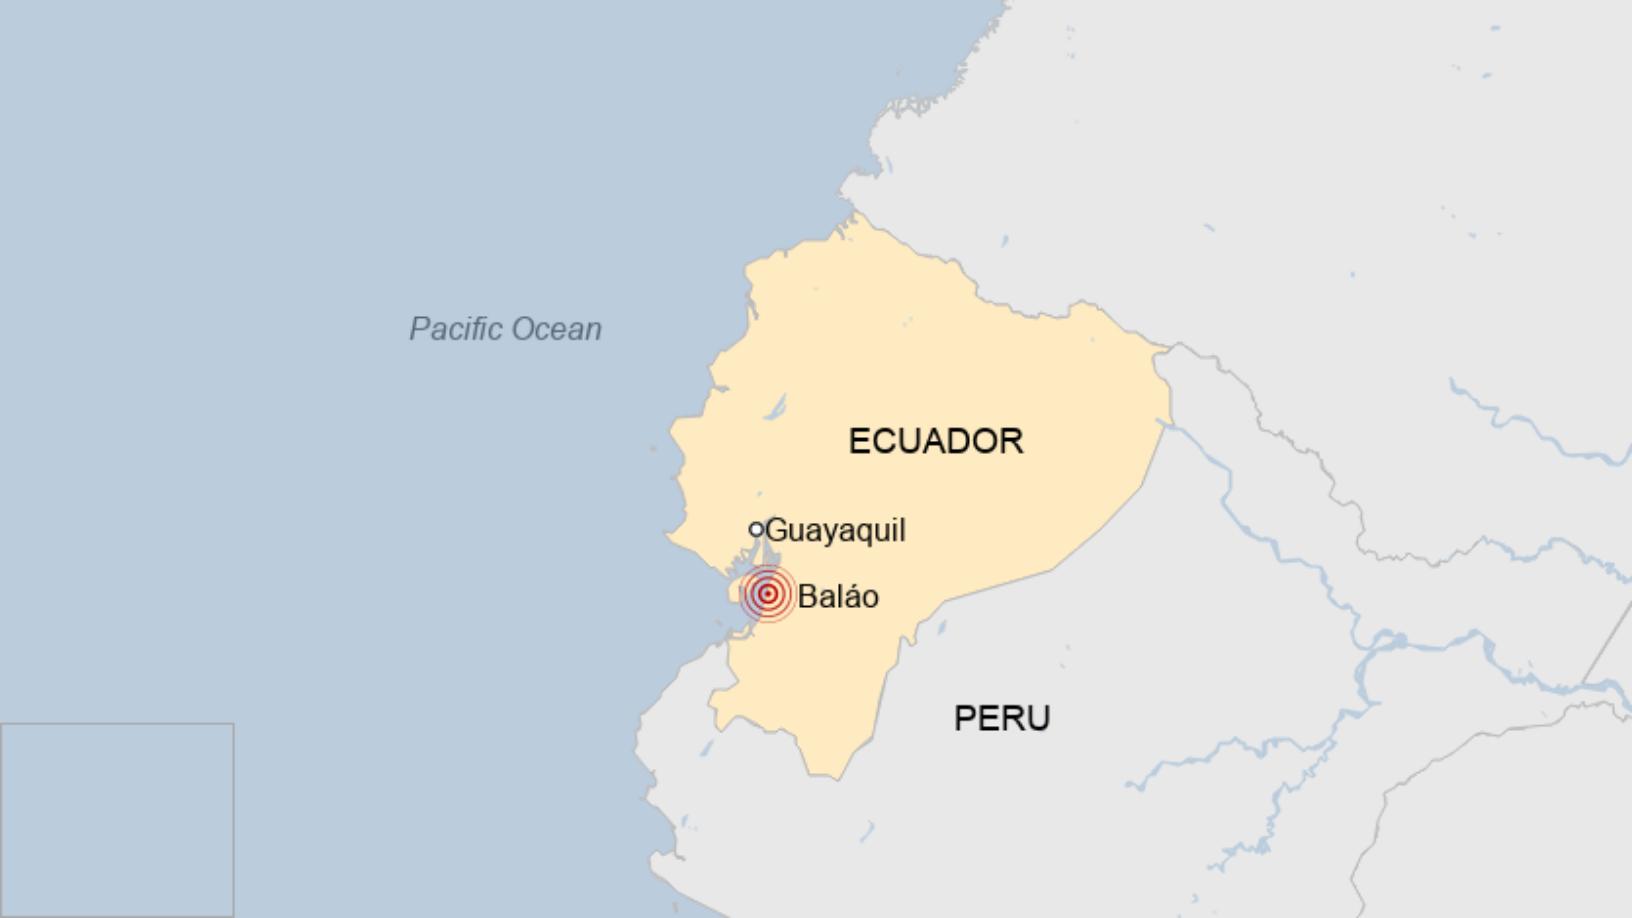 Map: Map of Ecuador showing location of the earthquake near Balao, around 50 miles south of the city of Guayaquil.